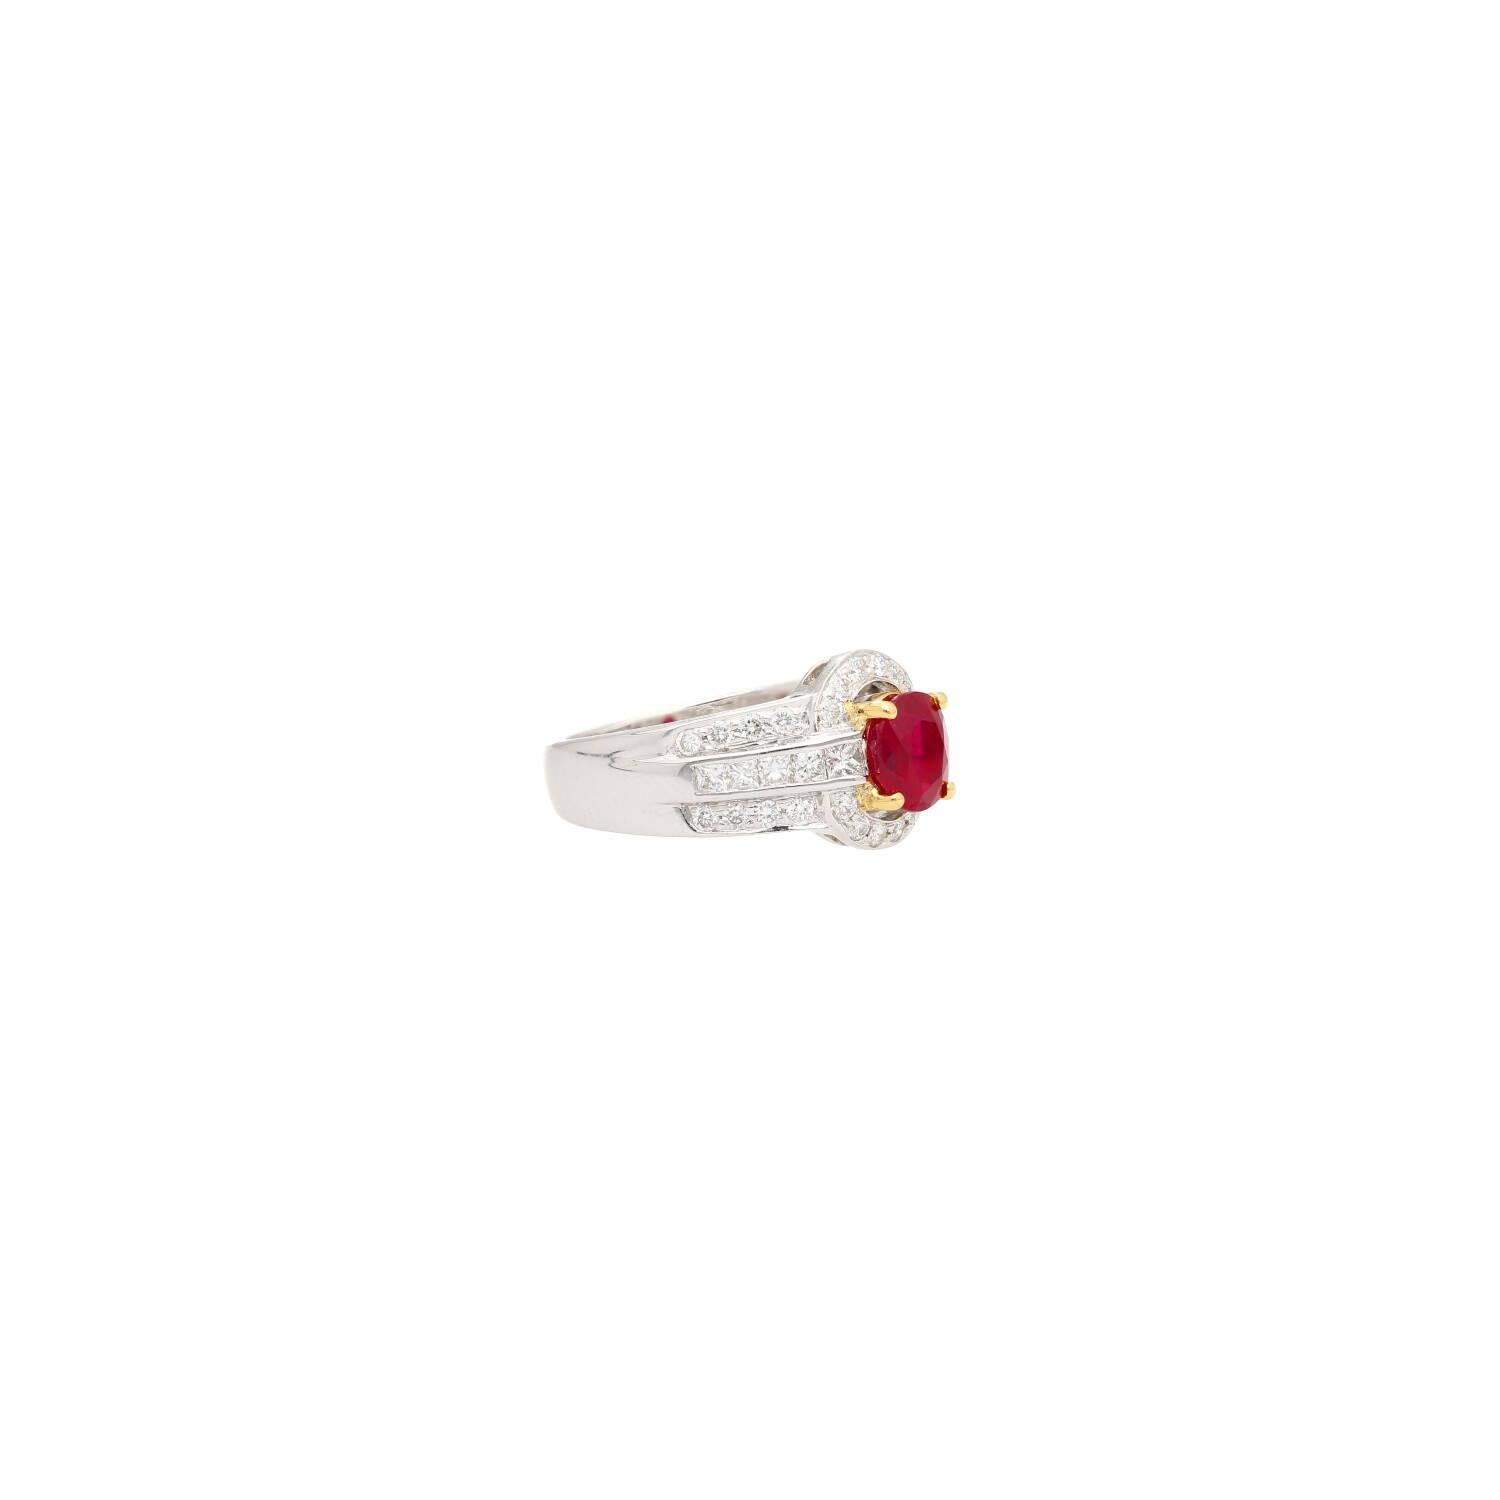 GRS Certified 1.37 Carat Burma Pigeon Blood Ruby & Diamond Ring in 18K Gold For Sale 2